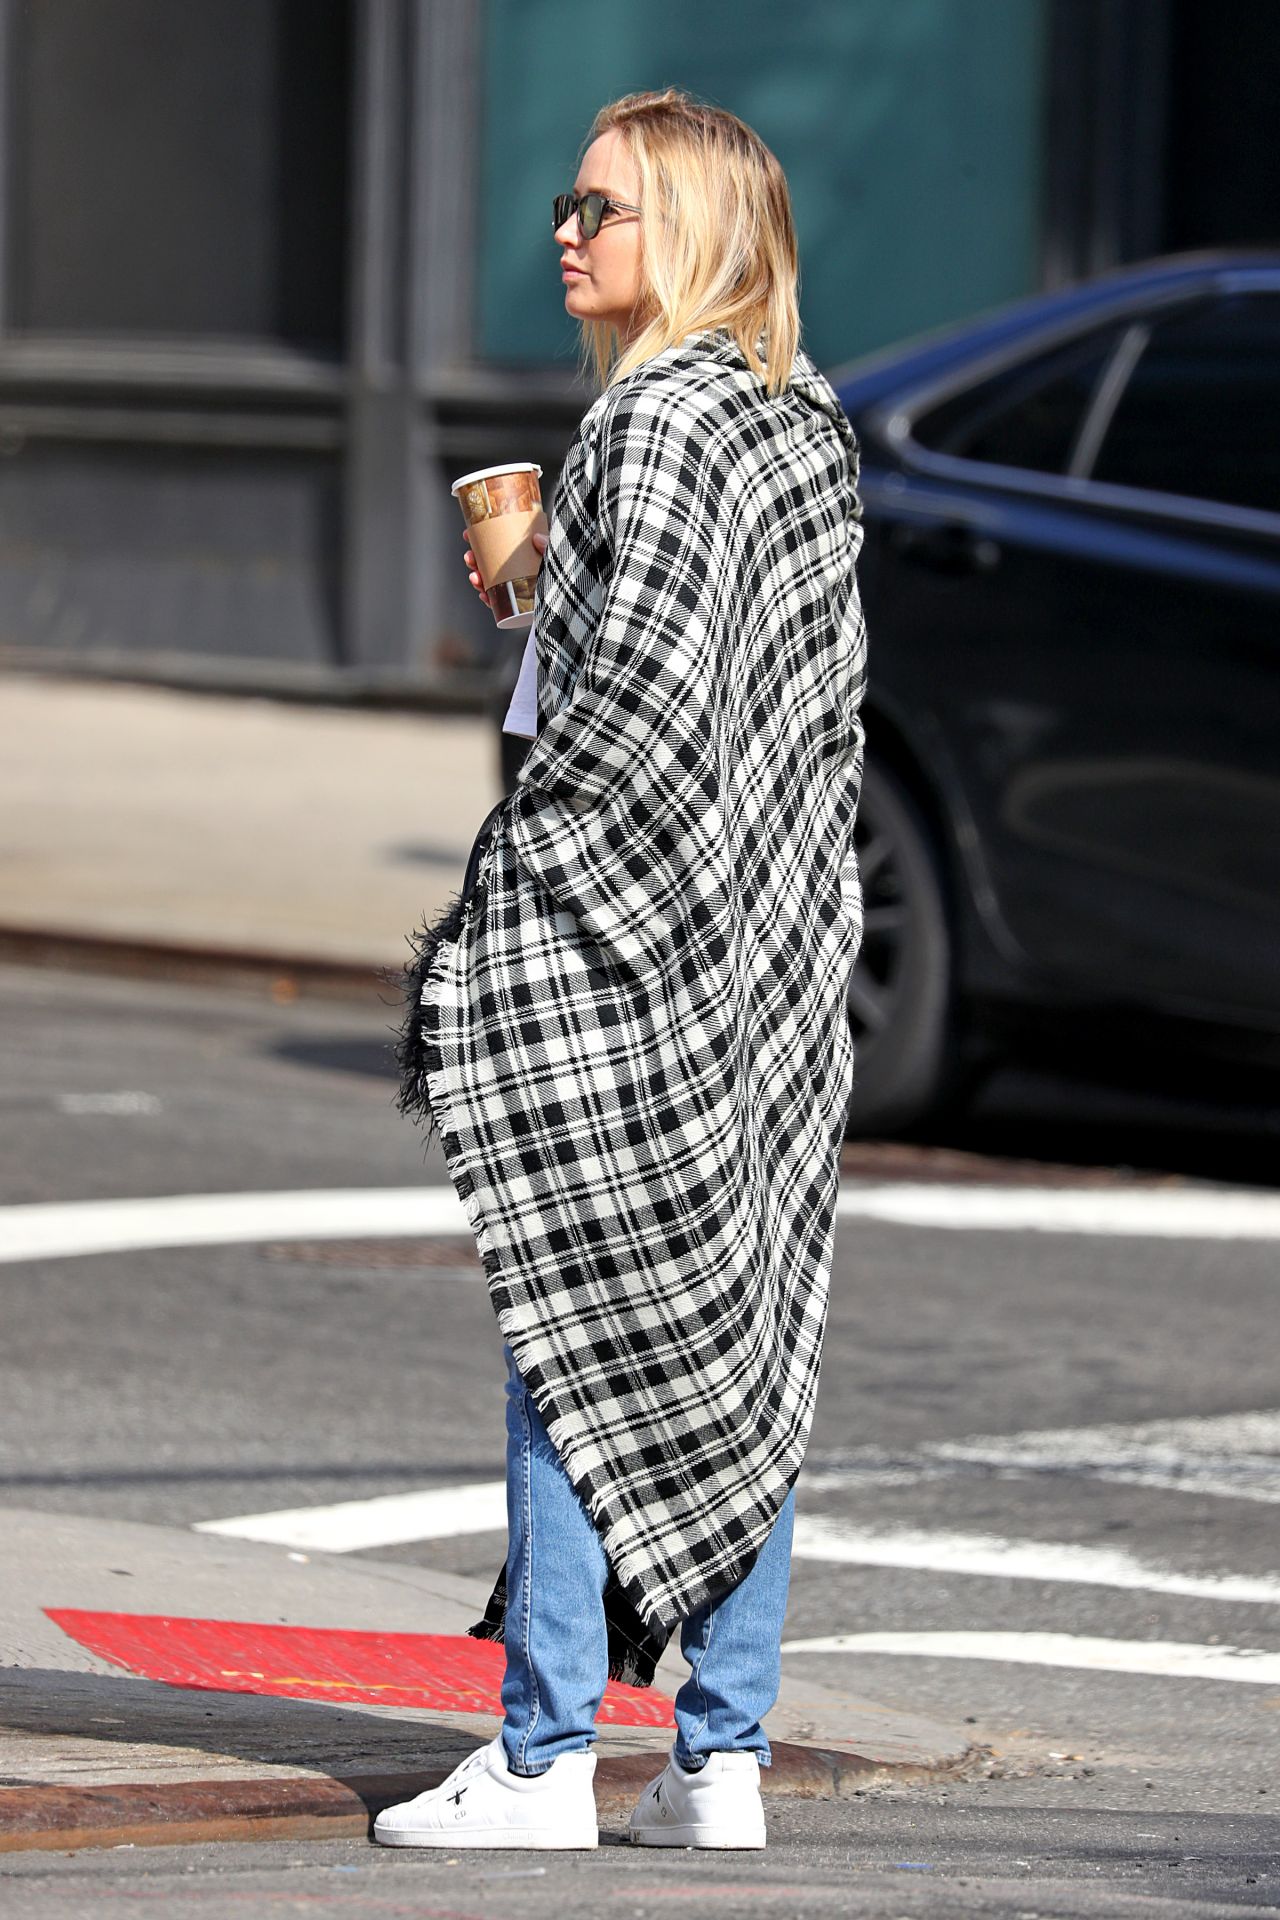 jennifer-lawrence-in-a-plaid-cape-scarf-out-in-nyc-10-05-2018-1.jpg